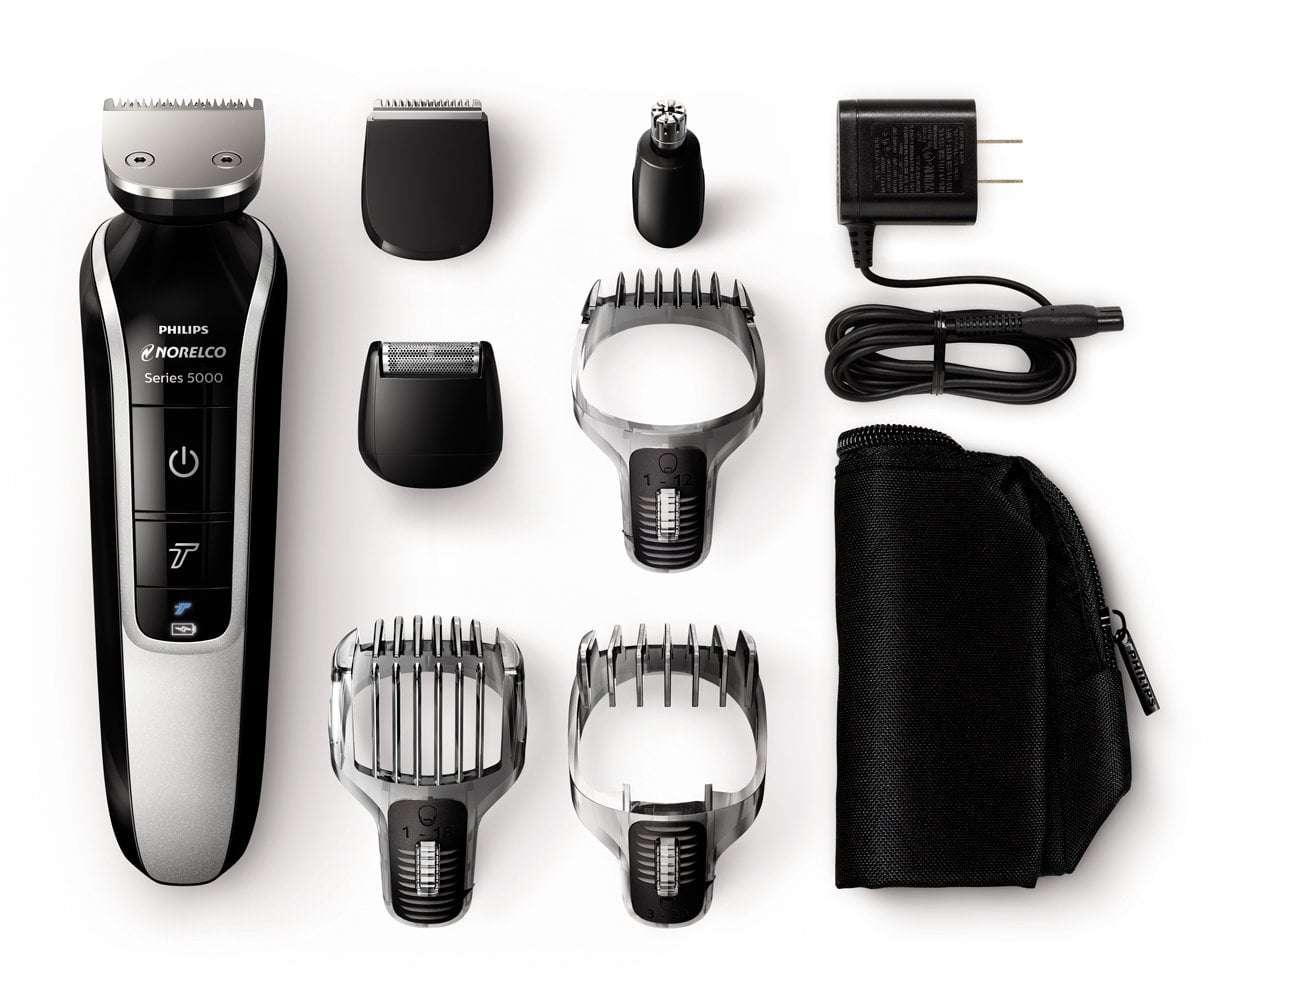 philips ultimate styling versatility